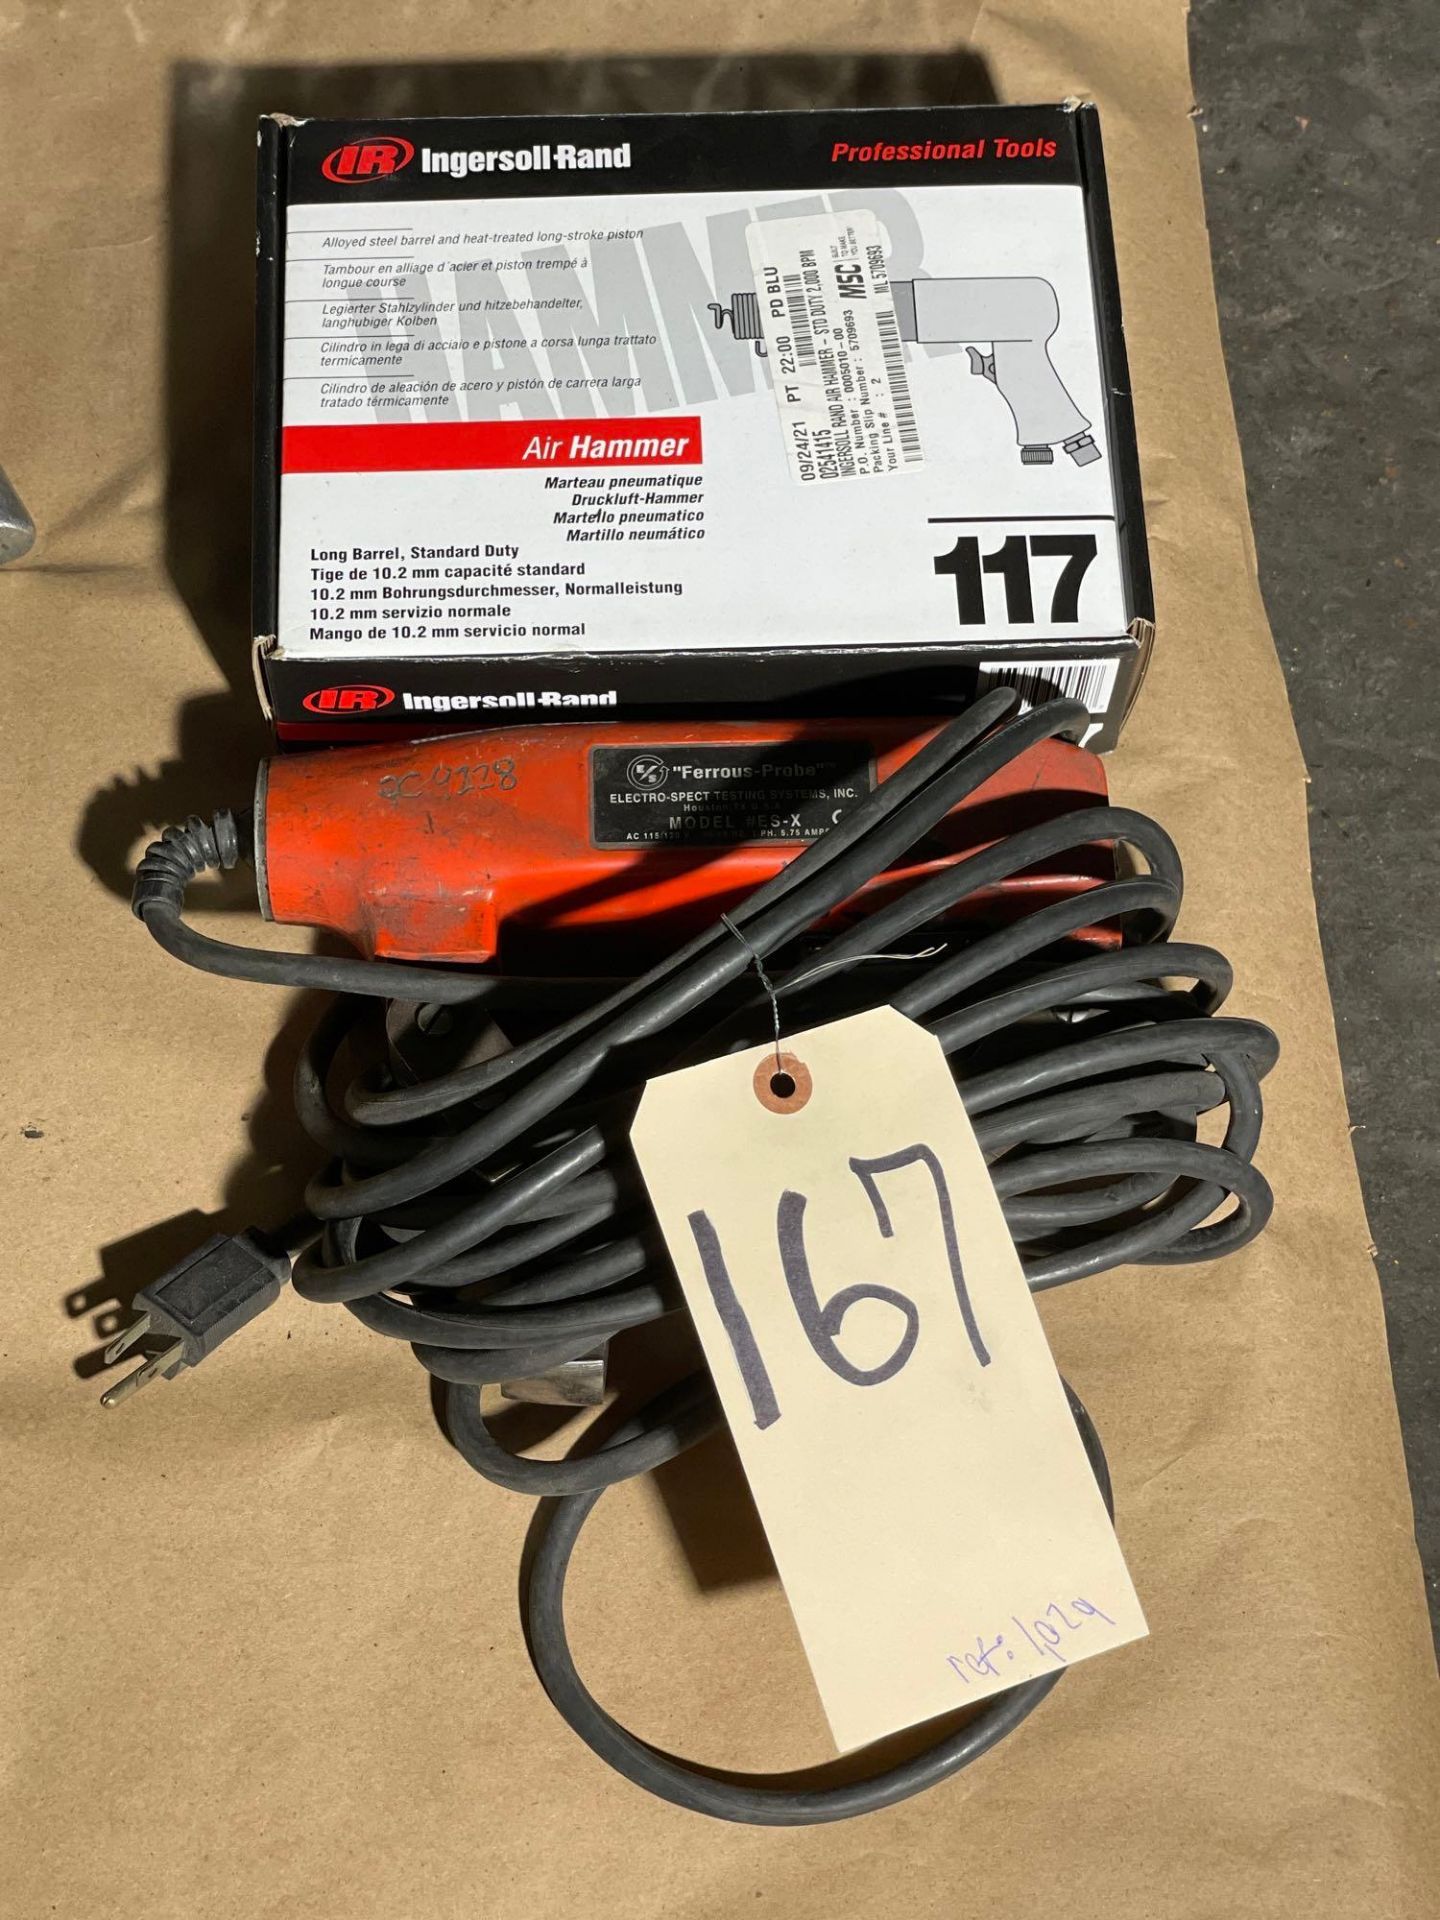 Lot of 2: (1) New Ingersoll-Rand Air Hammer , (10 Electro Spect Testing System Ferrous Probe)